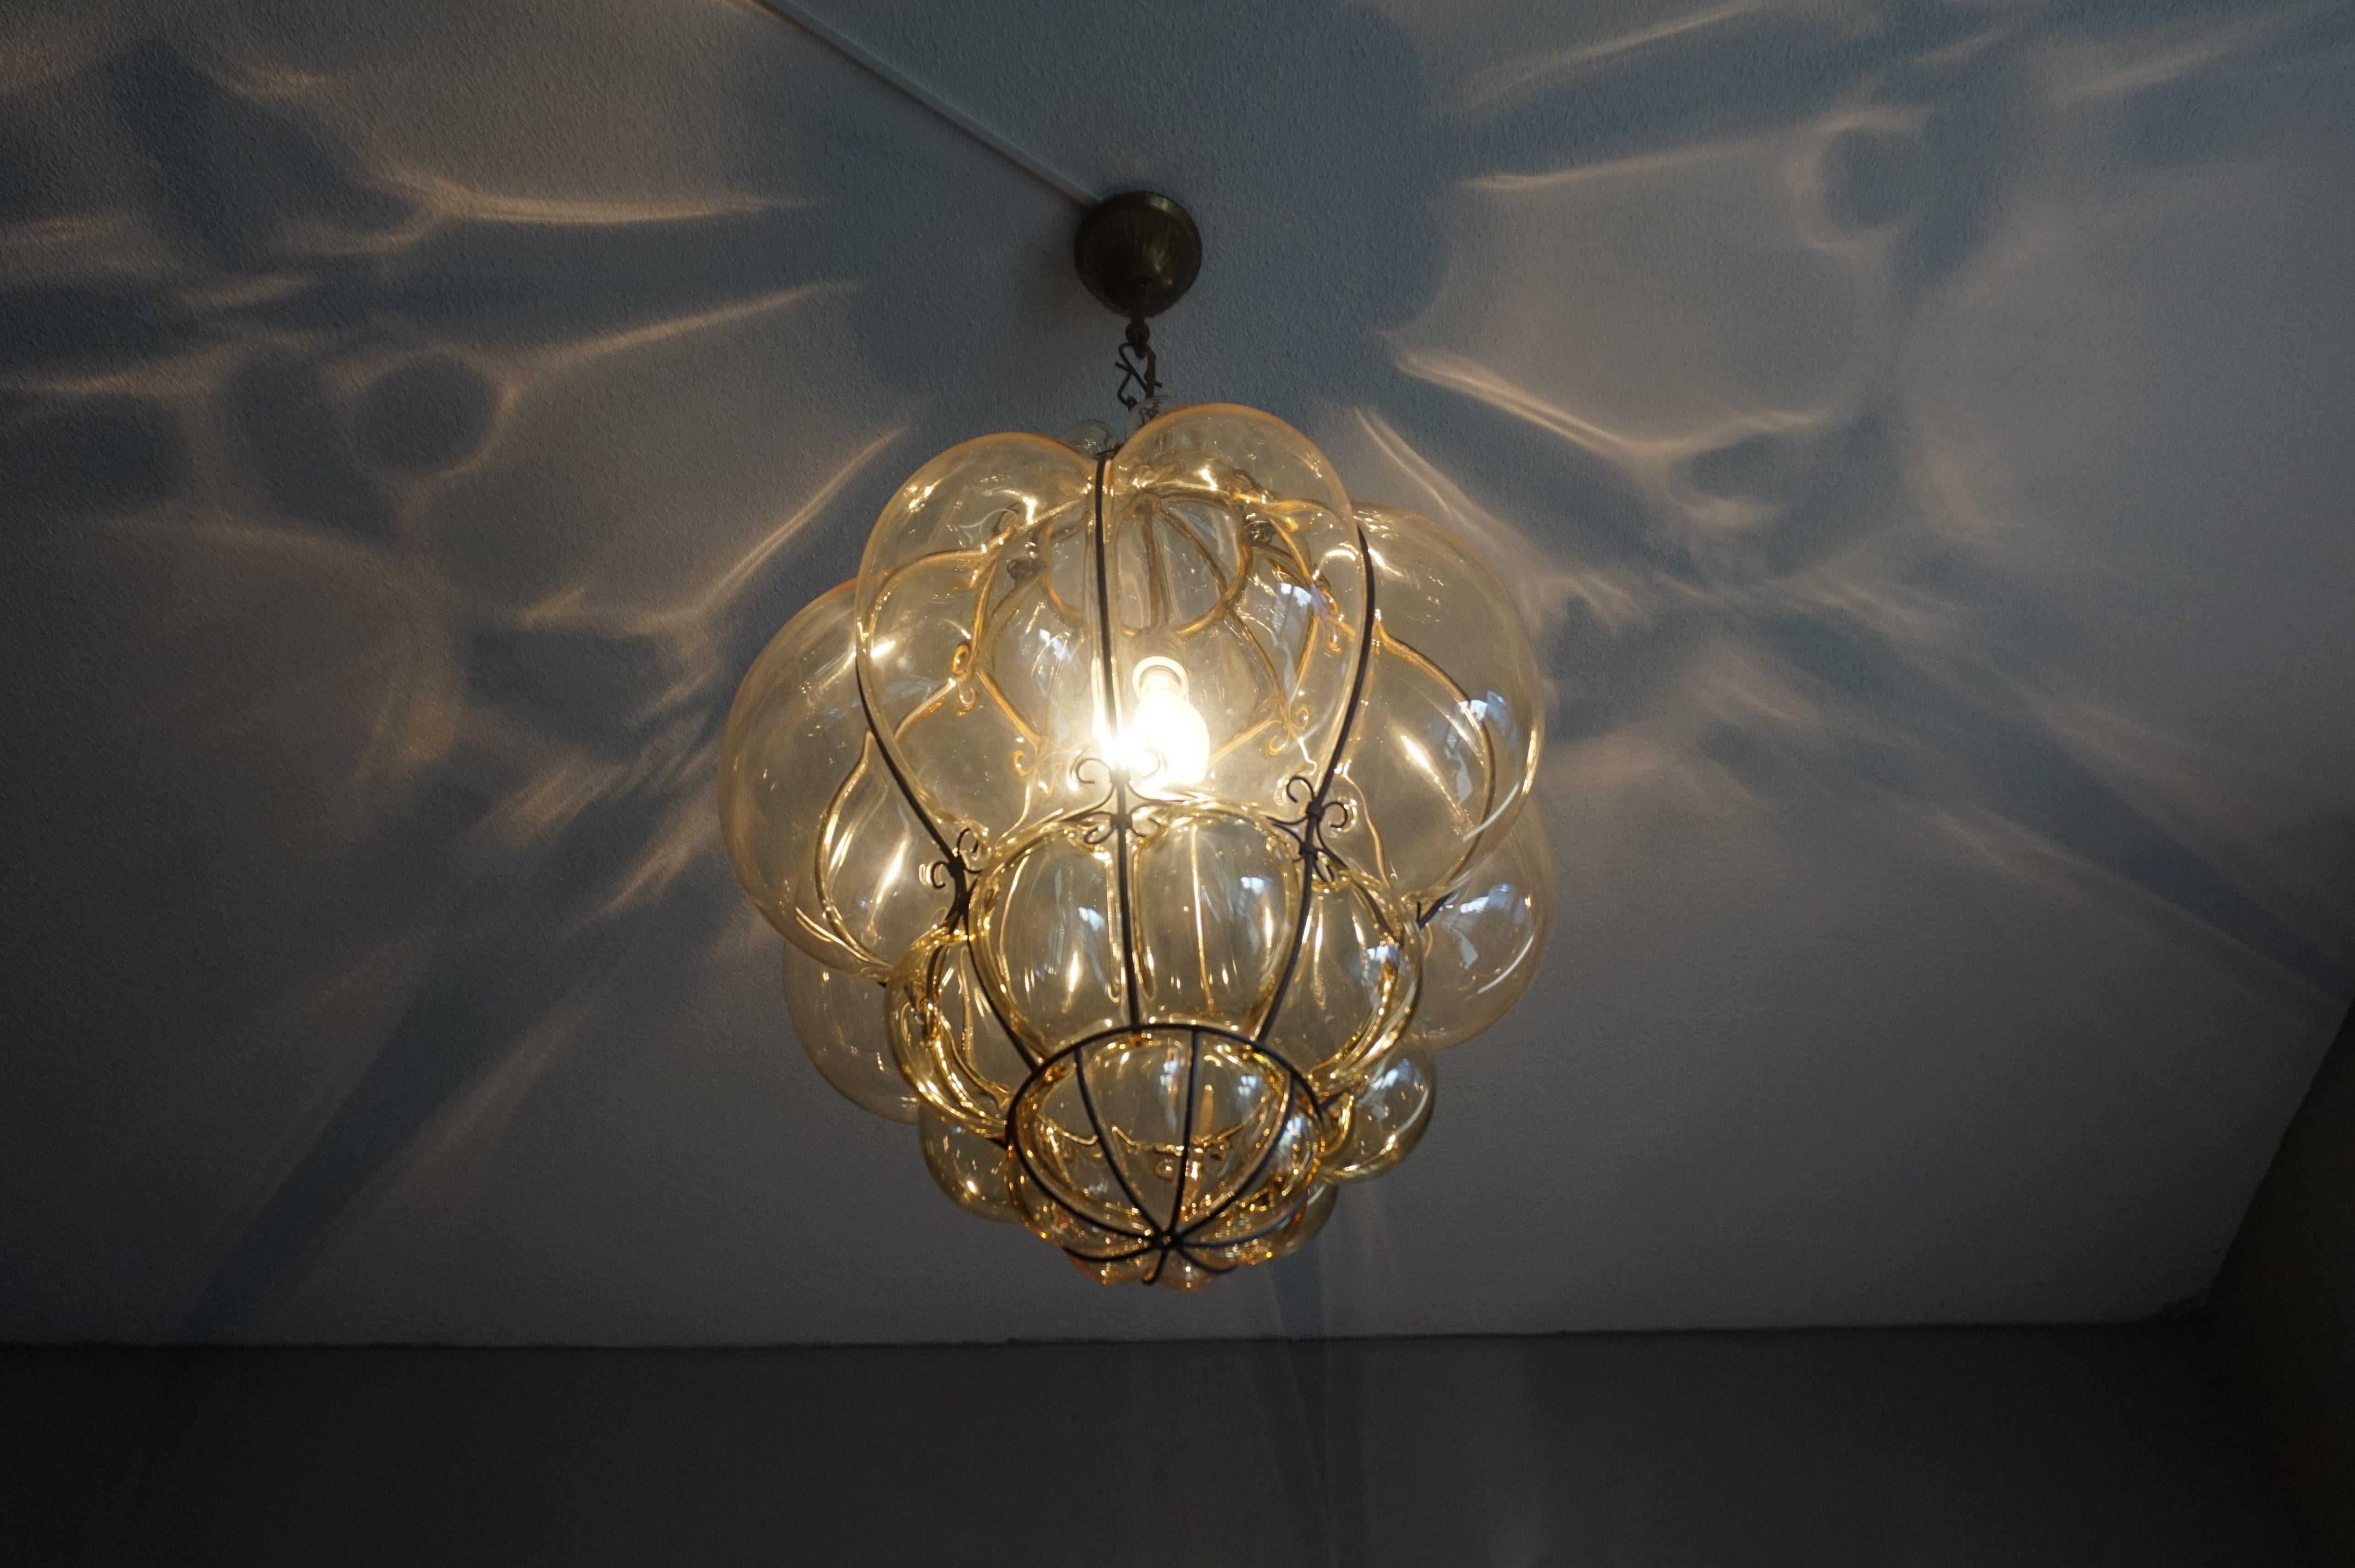 Extra large and superb condition, vintage Murano mouth blown chandelier.

To give you a better idea of the extra large and wonderful size of this striking Murano fixture we have added image 6 where it is next to one of our regular size and next to